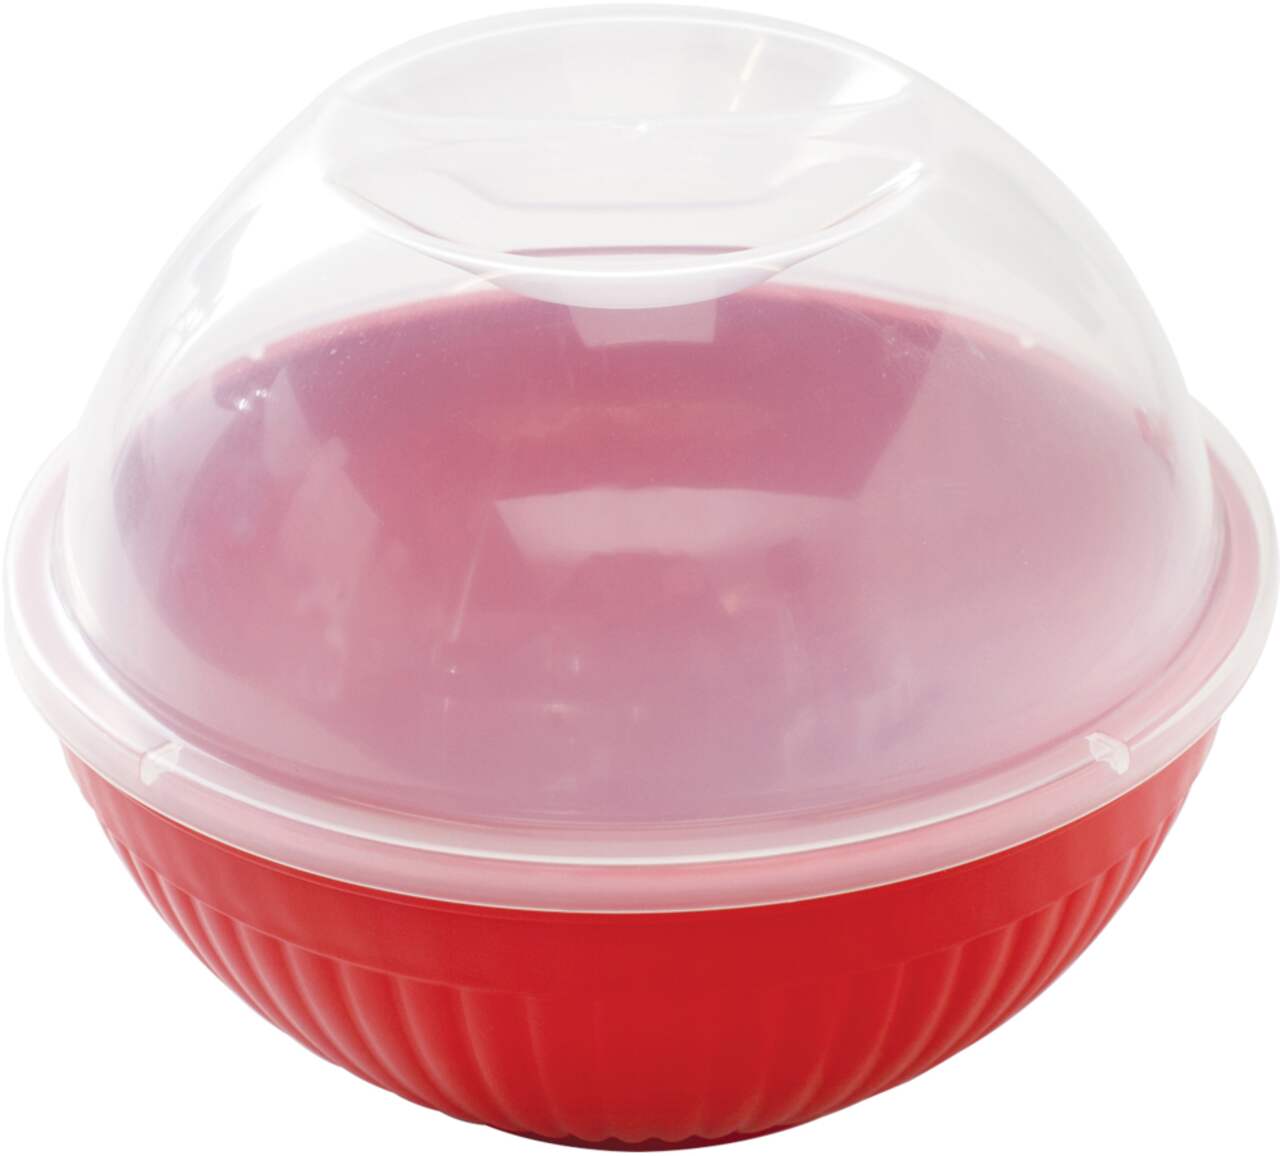 https://media-www.canadiantire.ca/product/living/kitchen/cookware/1426182/nordicware-quick-pop-popcorn-8a75de45-1aa3-4cbc-b1bf-c7af7c195f95.png?imdensity=1&imwidth=640&impolicy=mZoom